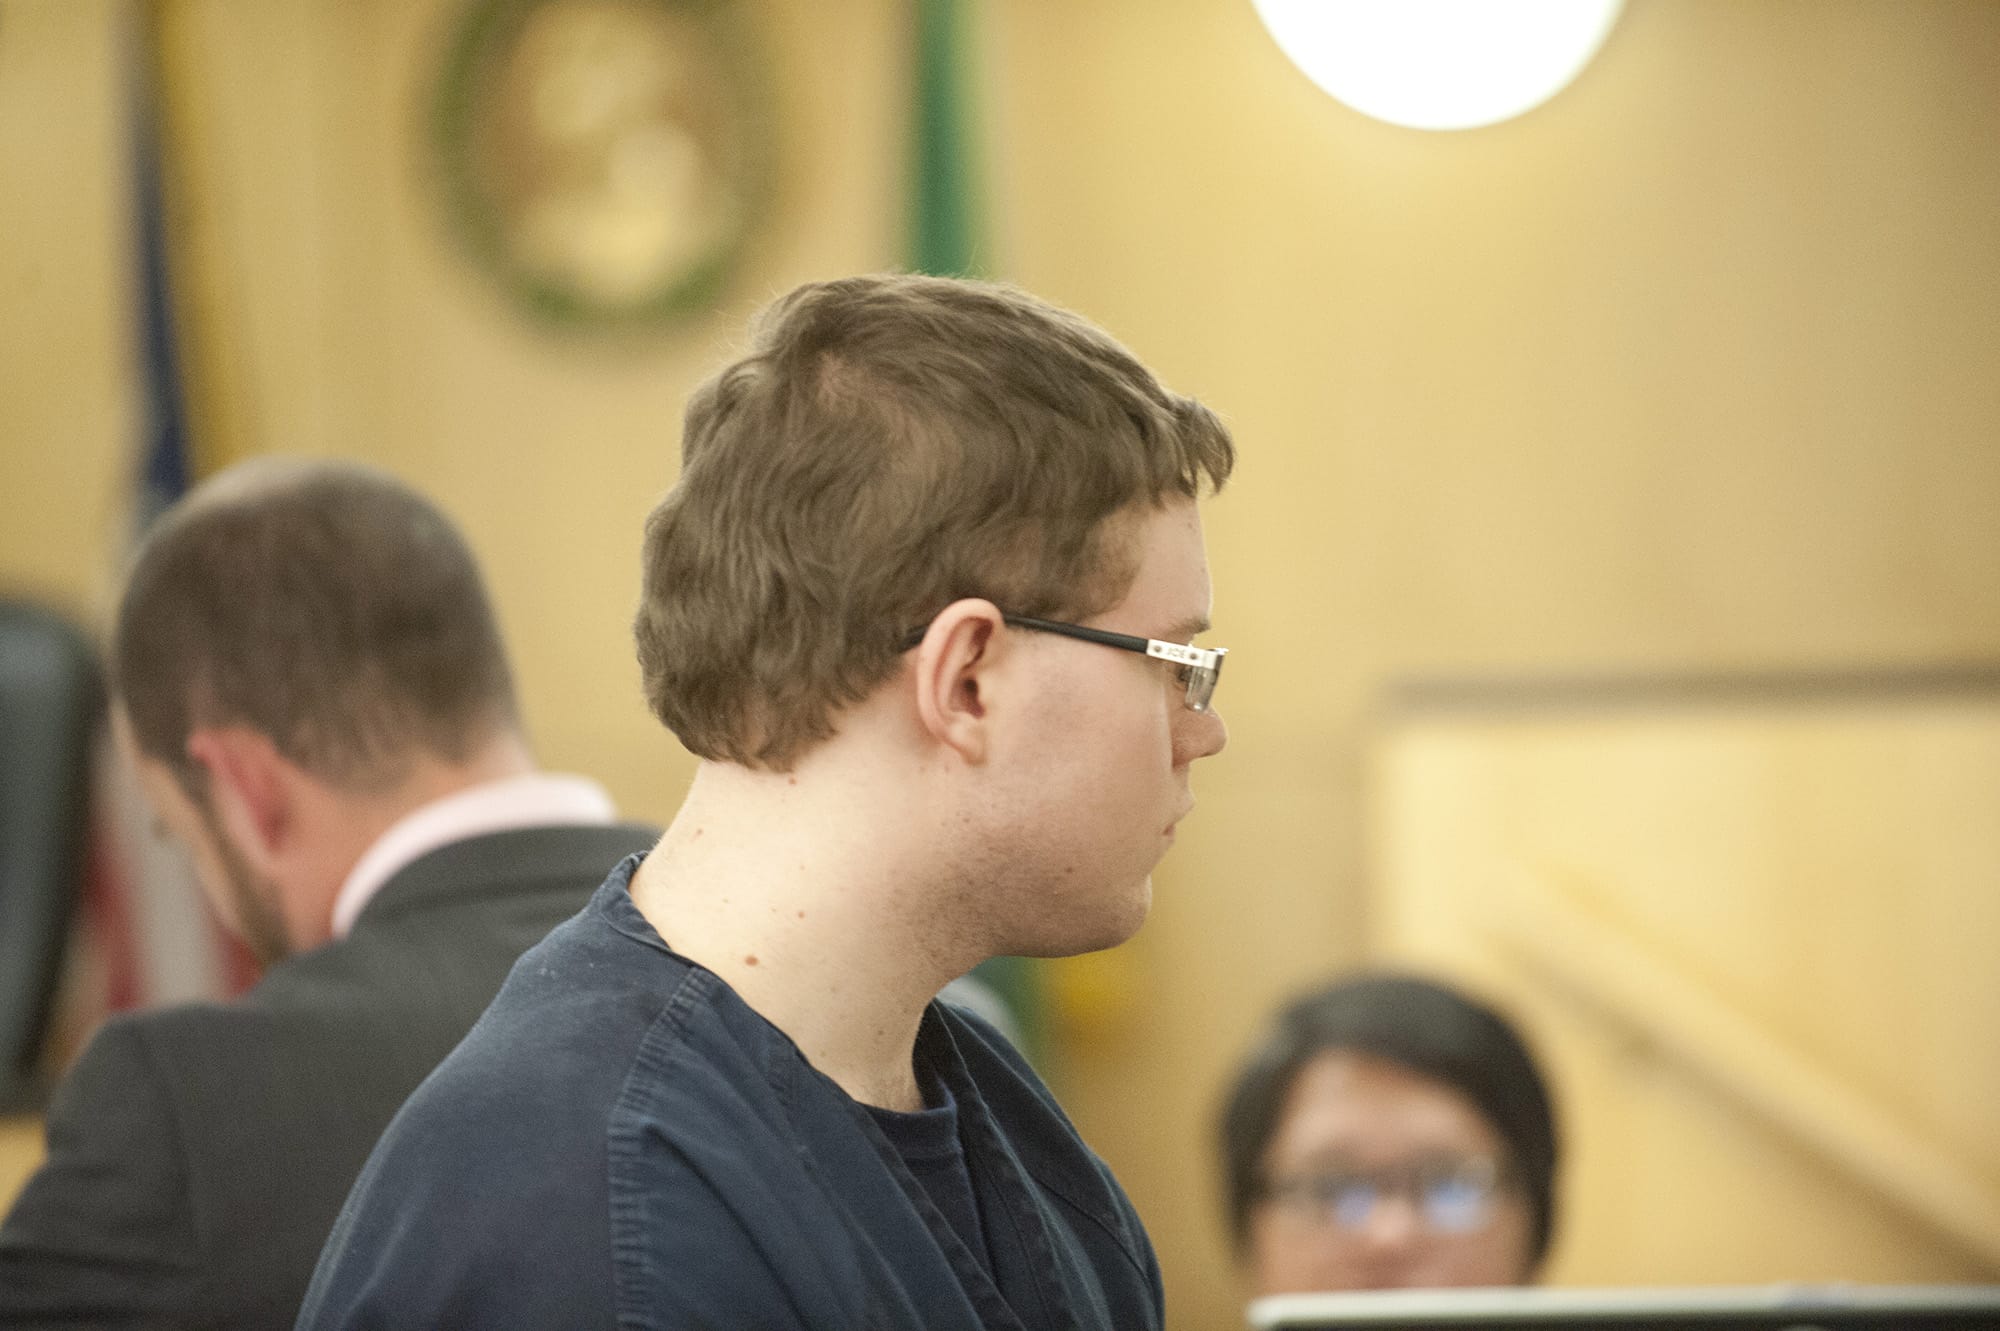 Former Boy Scout mentor Shawn Edward Turner, 22, of Vancouver is sentenced in connection with the sexual abuse of a Boy Scout.